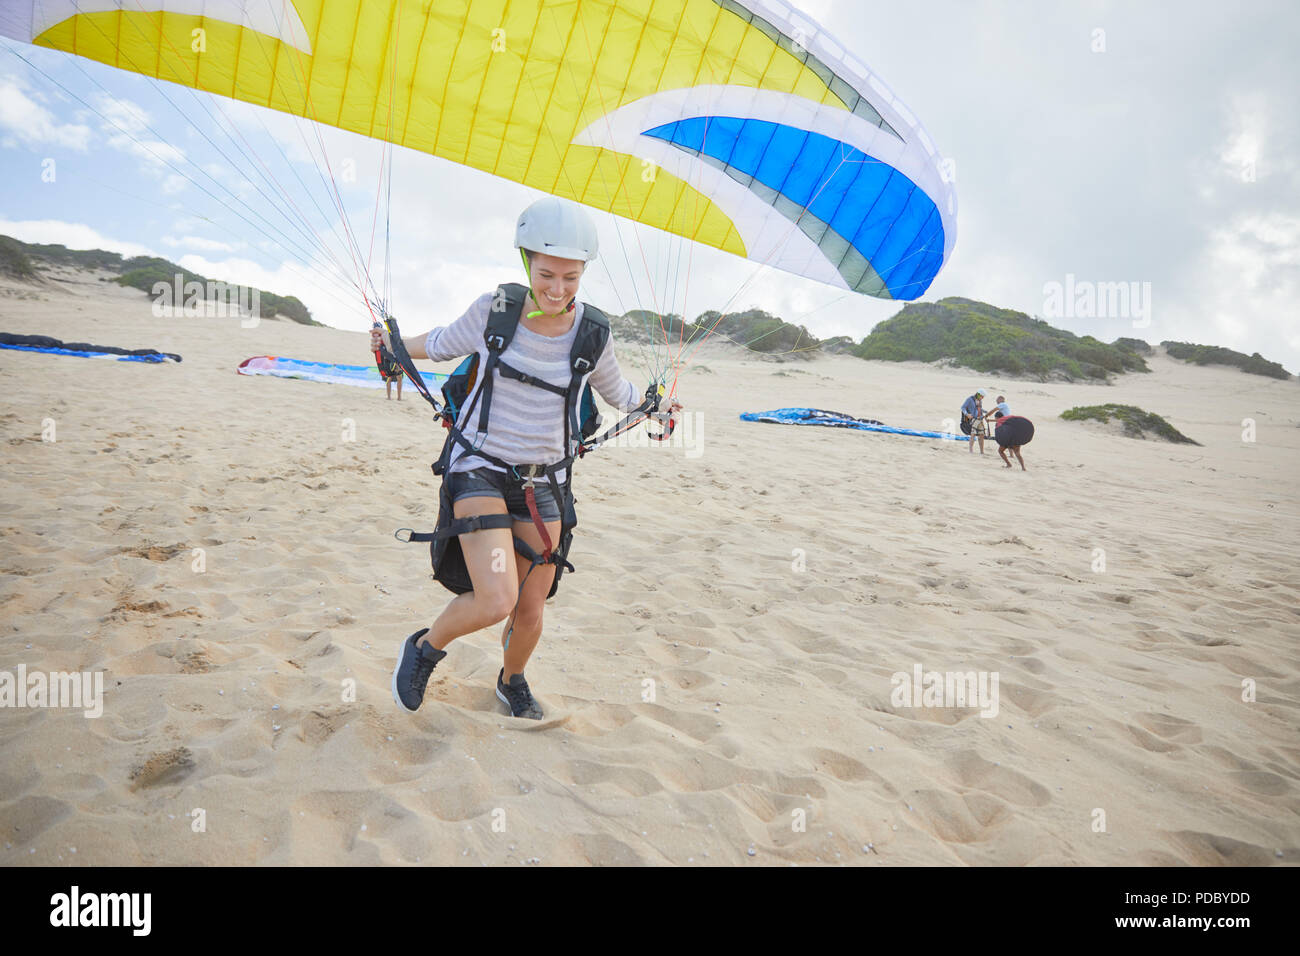 Female paraglider with parachute running, taking off on beach Stock Photo